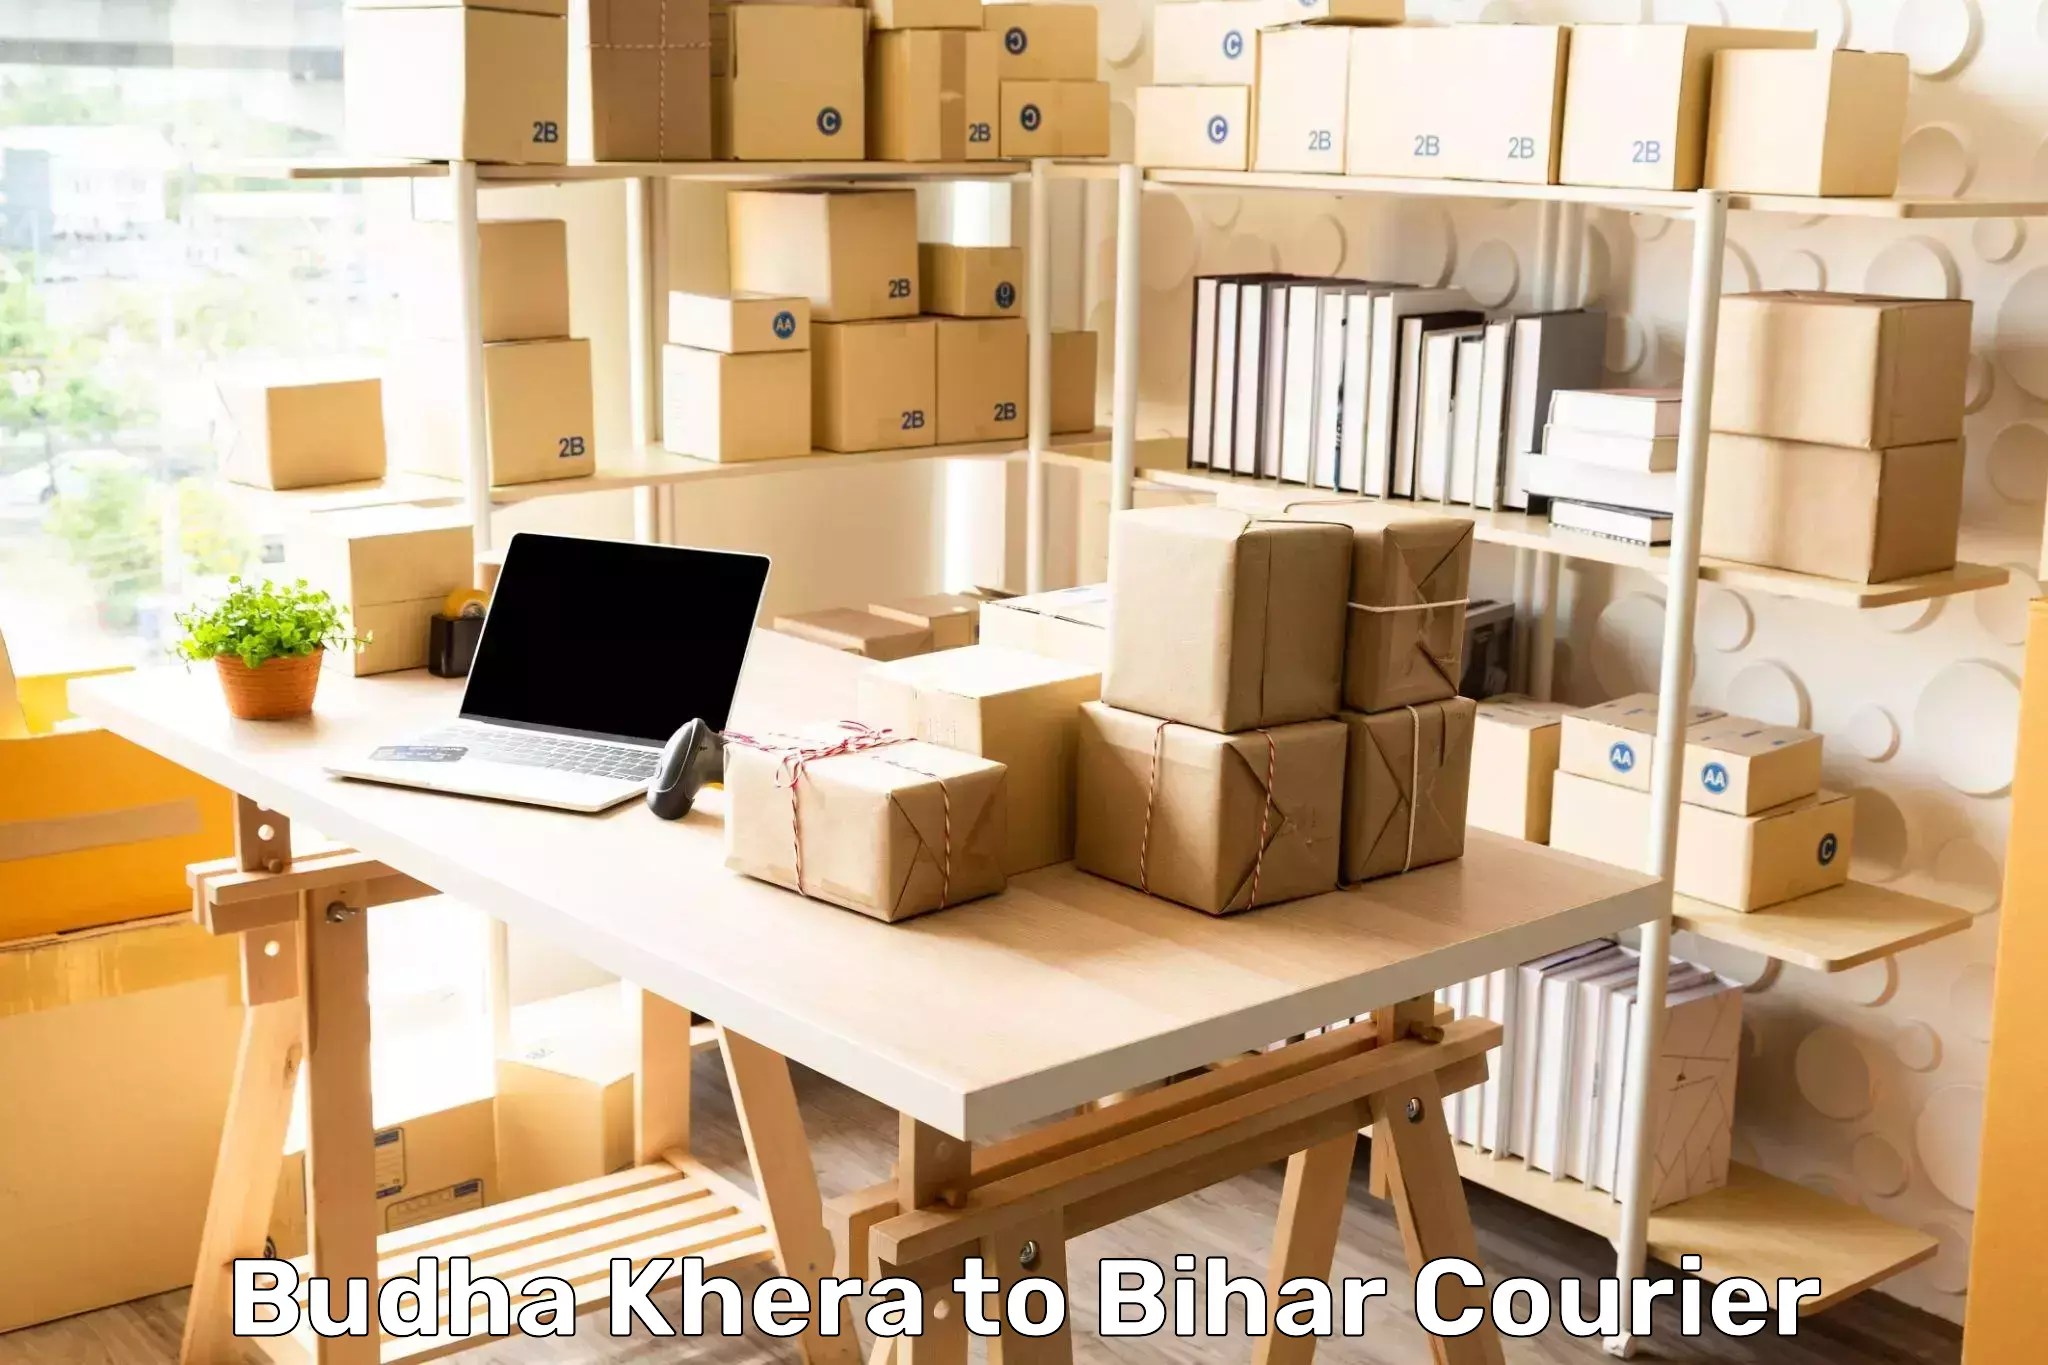 Subscription-based courier Budha Khera to Fatwah